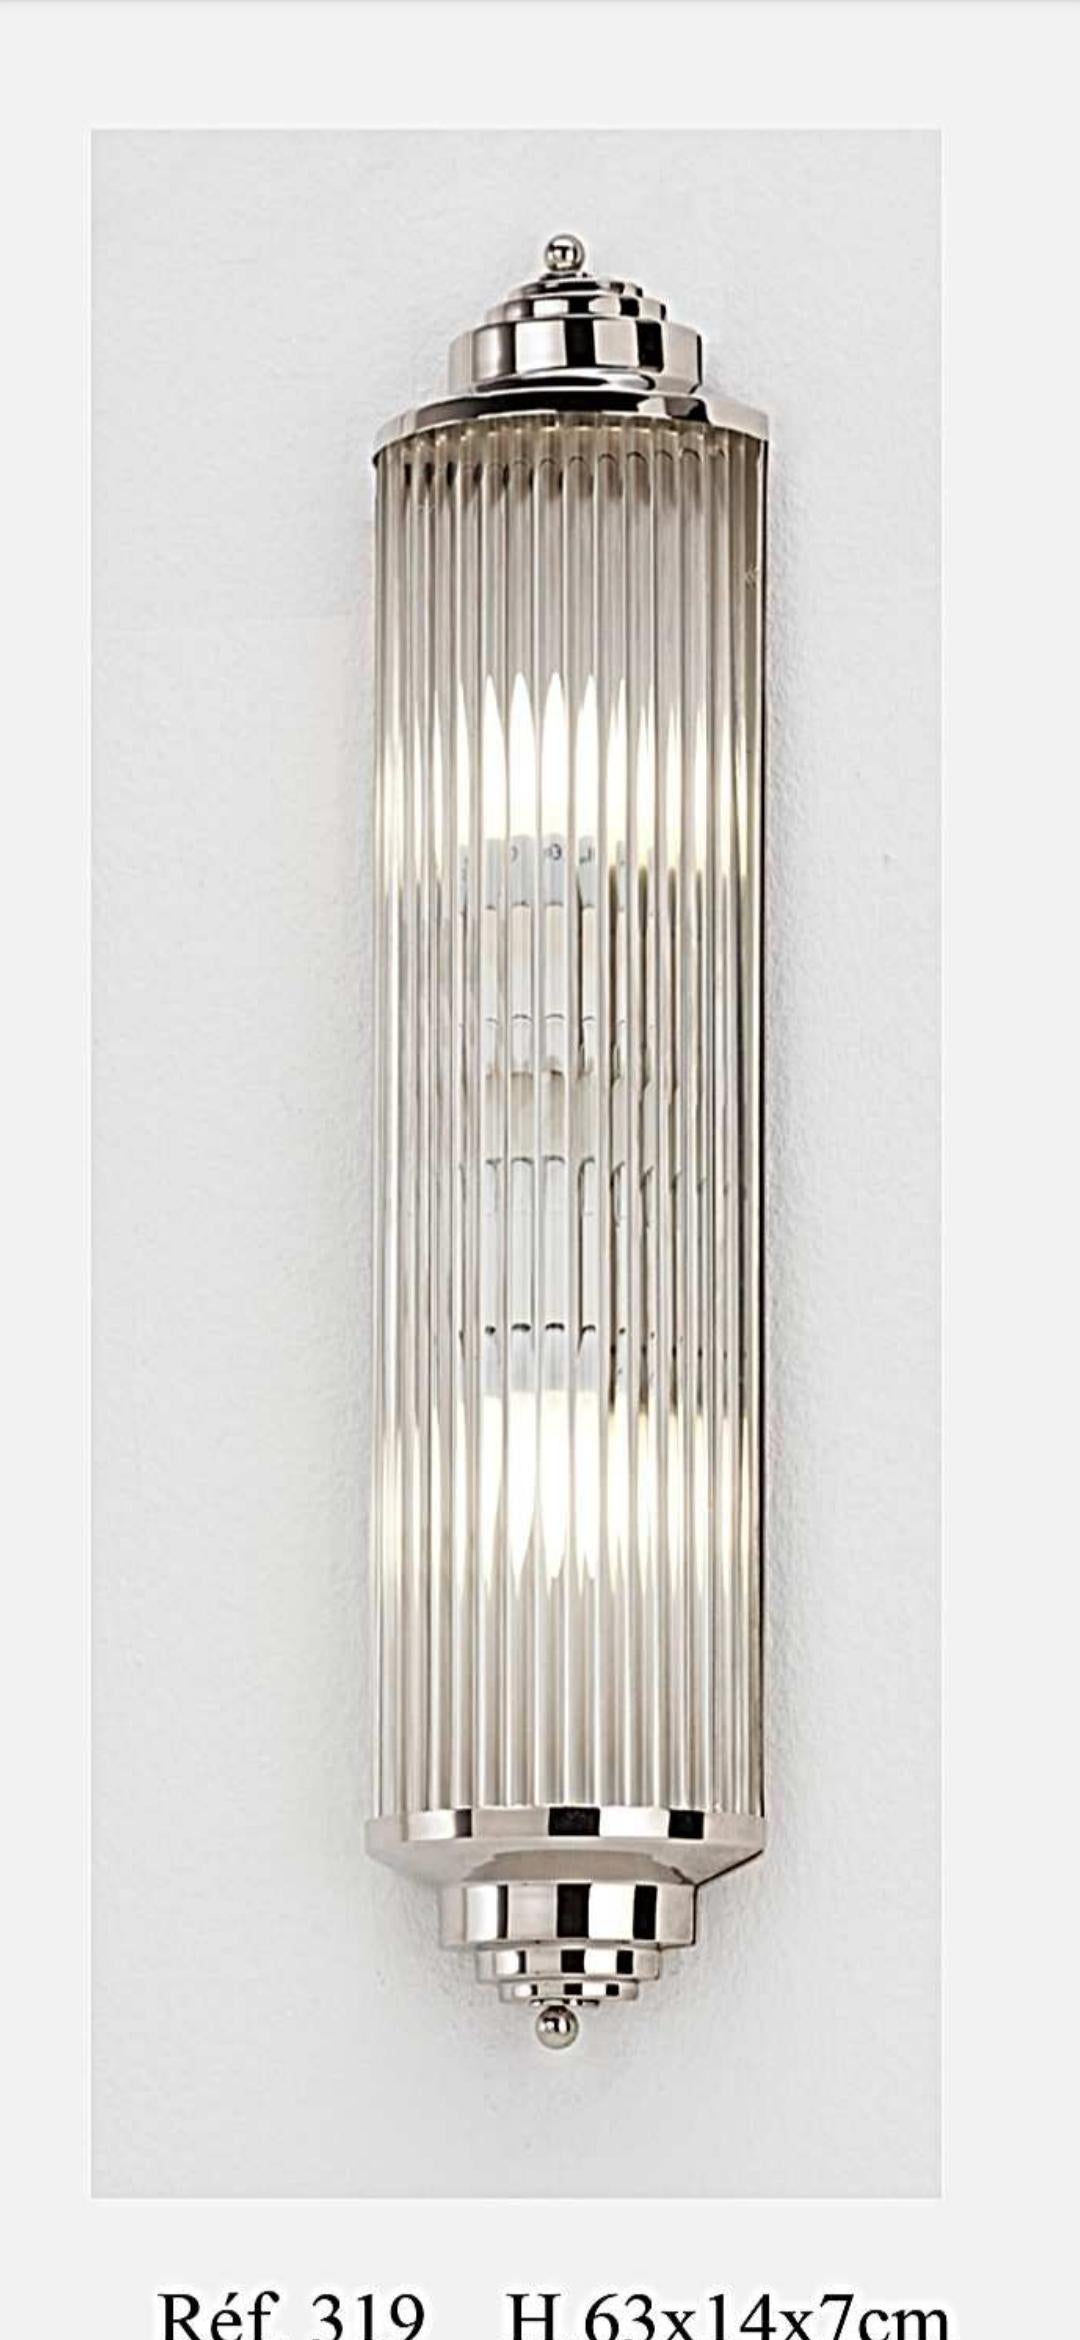 Hand-Crafted Art Deco Nickel Brass Sconce and Glass rods For Sale